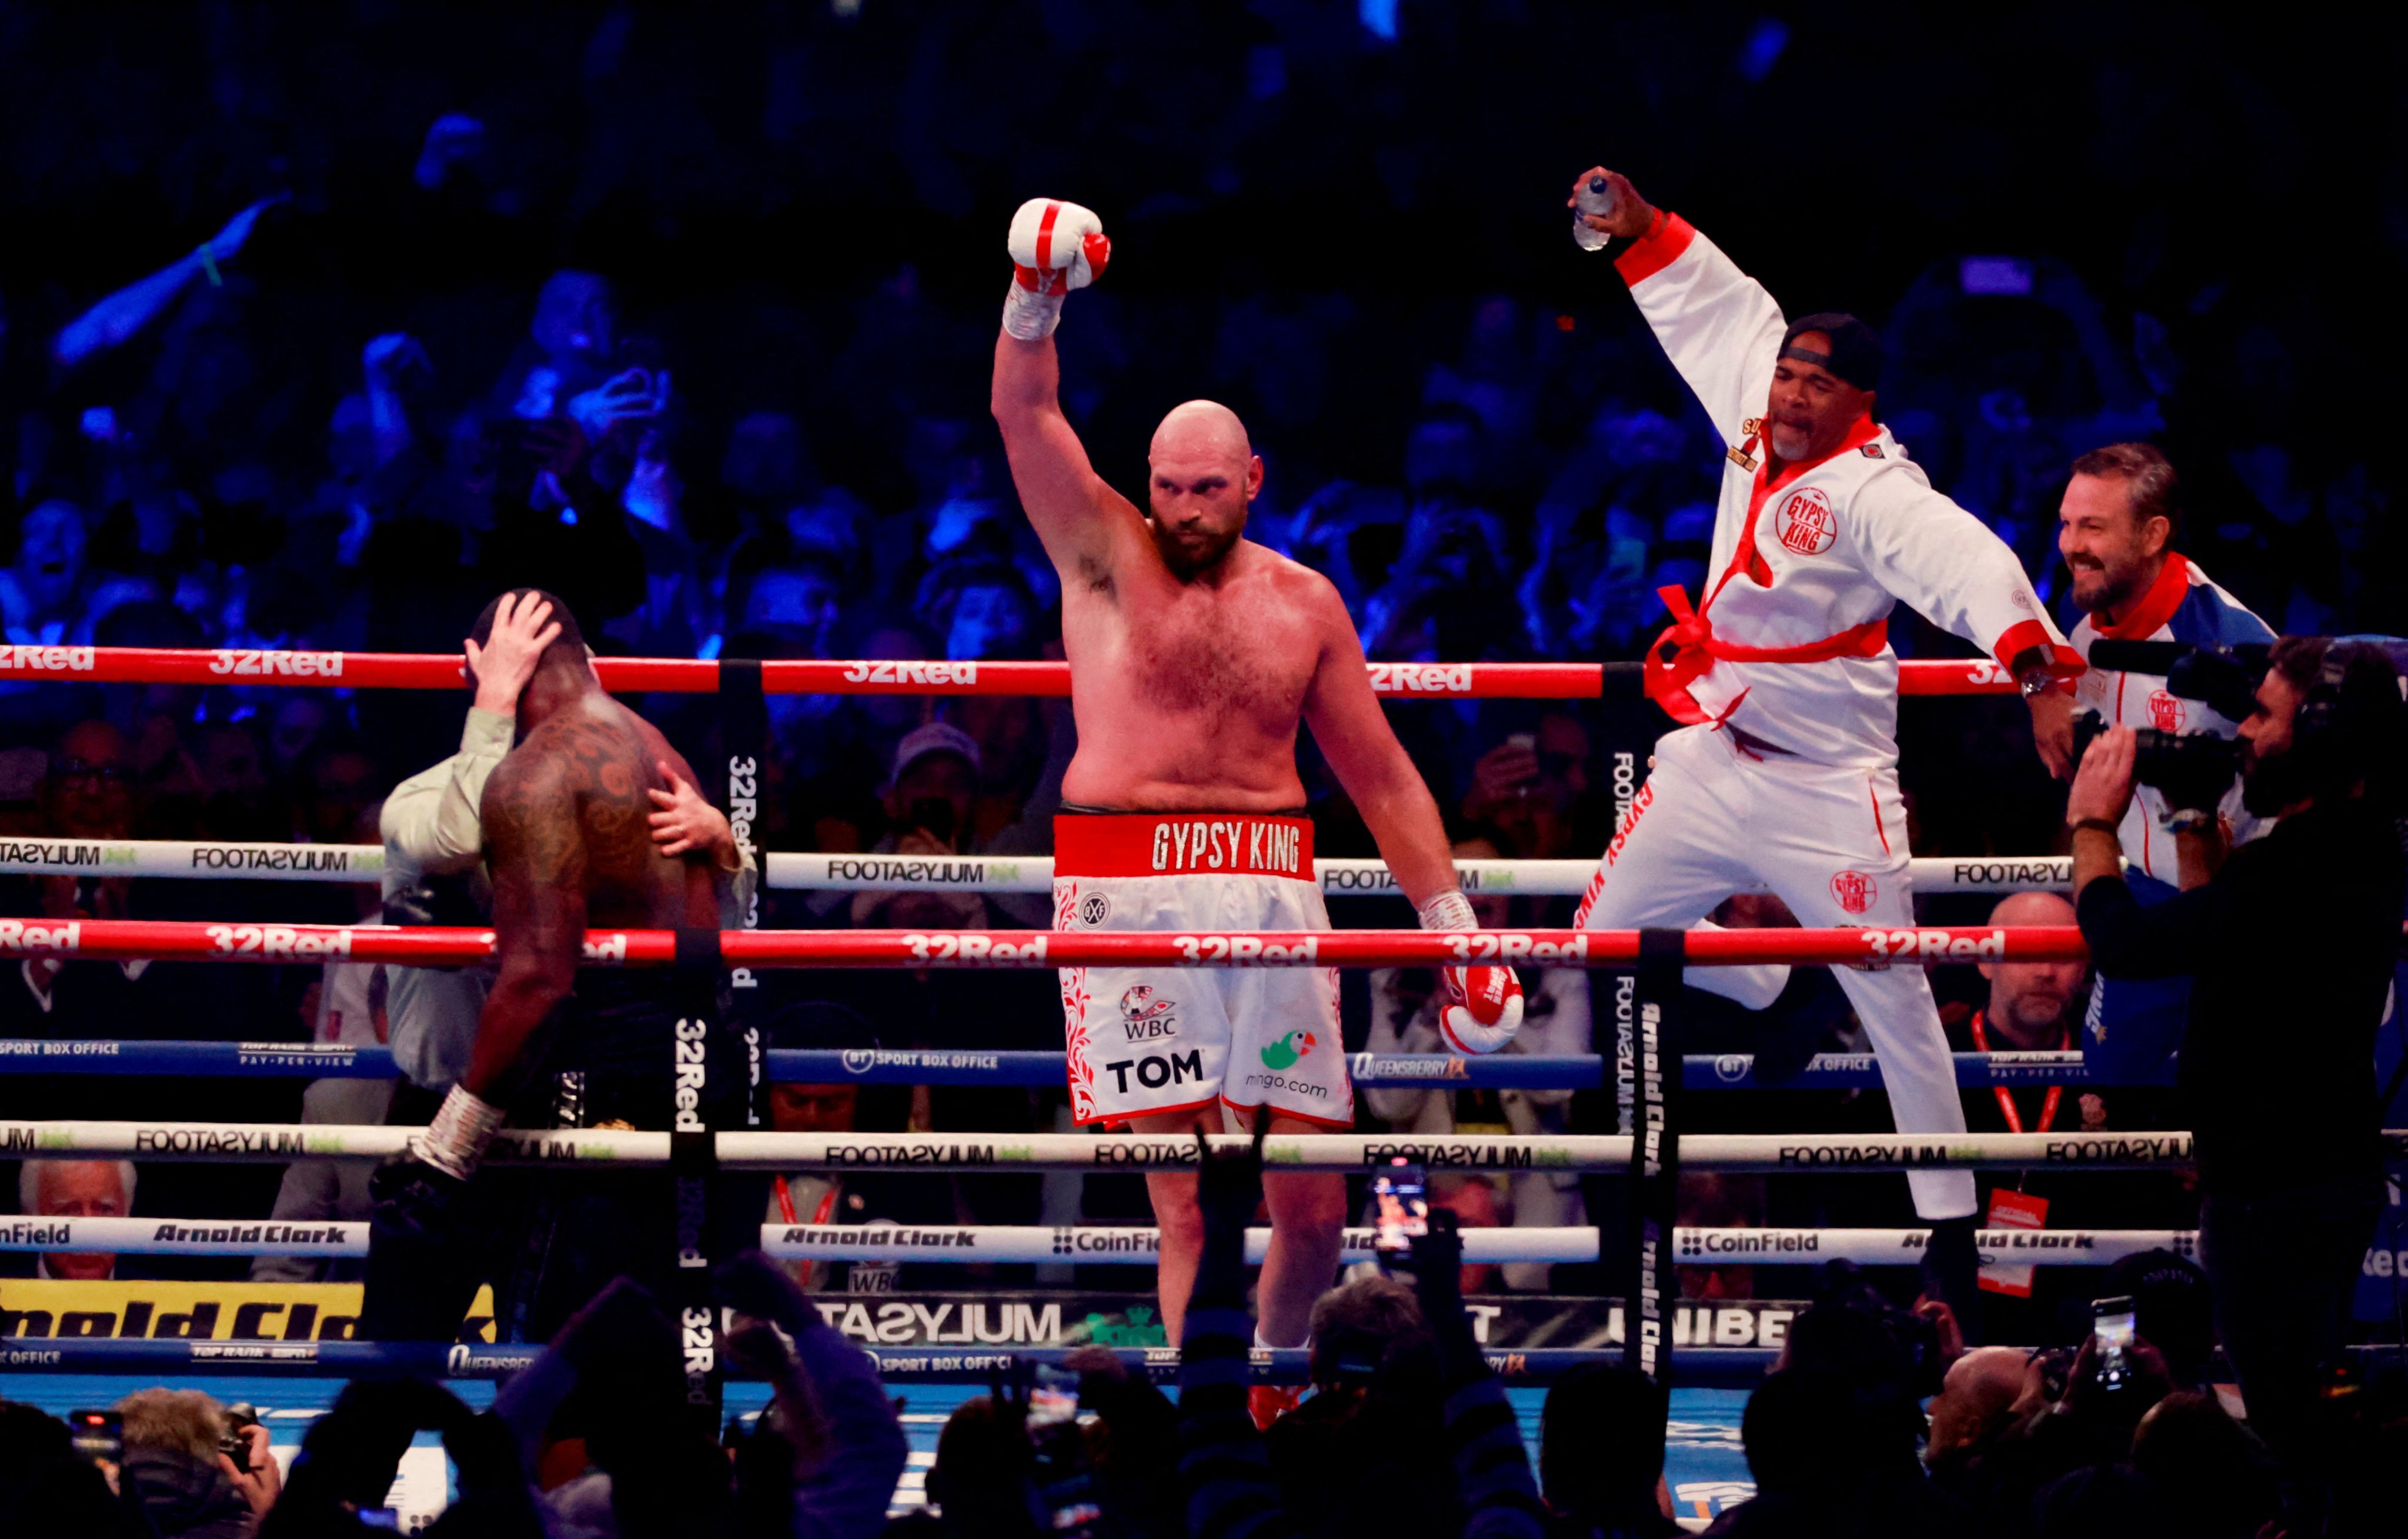 Tyson Fury celebrates after defeating Dillian Whyte in the all-British heavyweight bout at Wembley. Photo: Action Images via Reuters